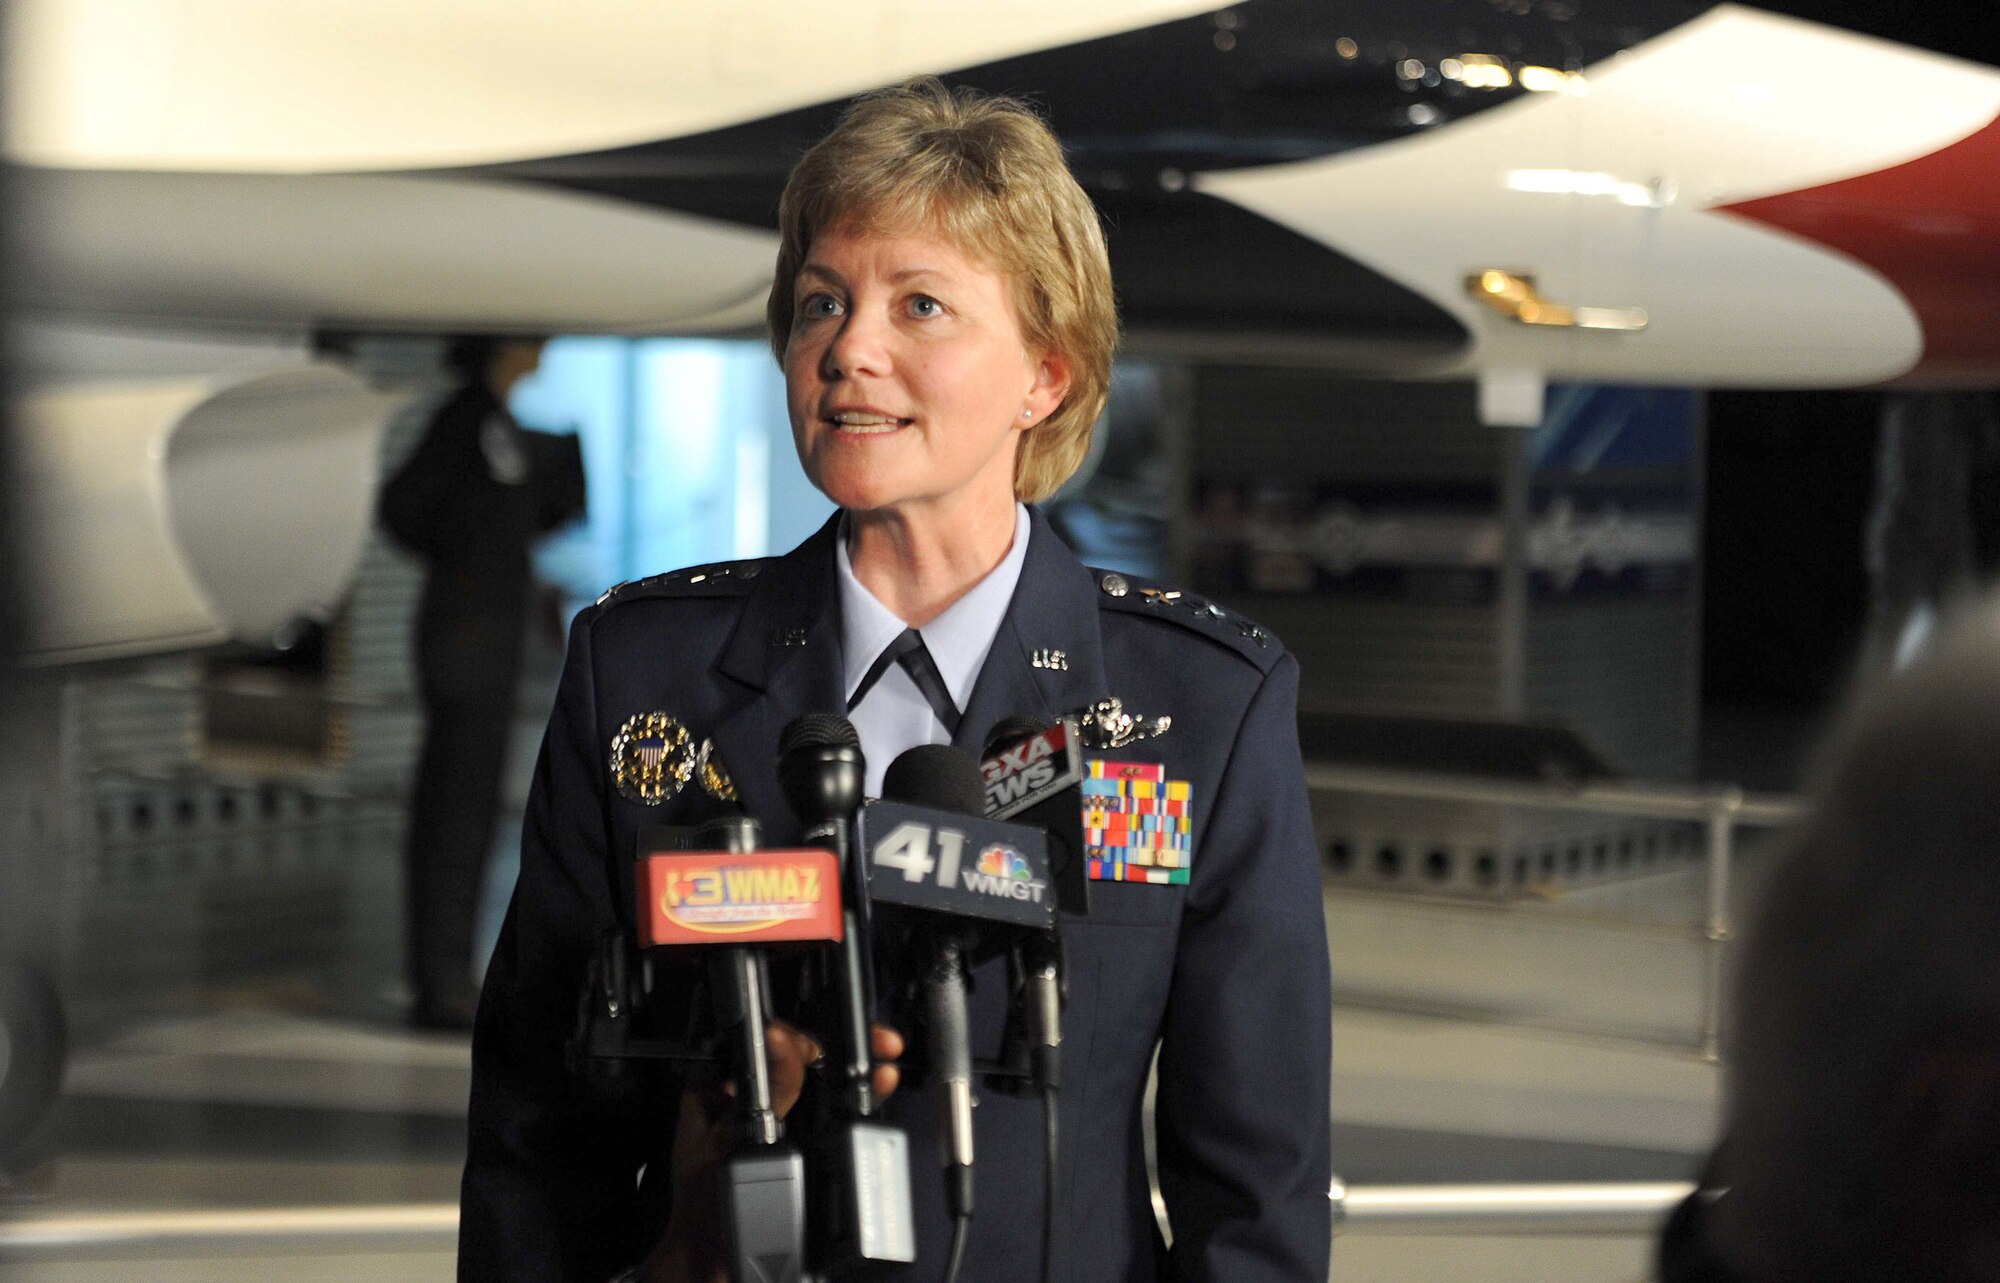 Lt. Gen. Maryanne Miller, speaks to the media following the Air Force Reserve Command change of command ceremony at the Museum of Aviation Century of Flight Hangar July 15, 2016. Miller, who took command of AFRC, is the first female Citizen Airman to hold the position. She is also the first female Citizen Airman to achieve the rank of lieutenant general. (U.S. Air Force photo by Tommie Horton)
